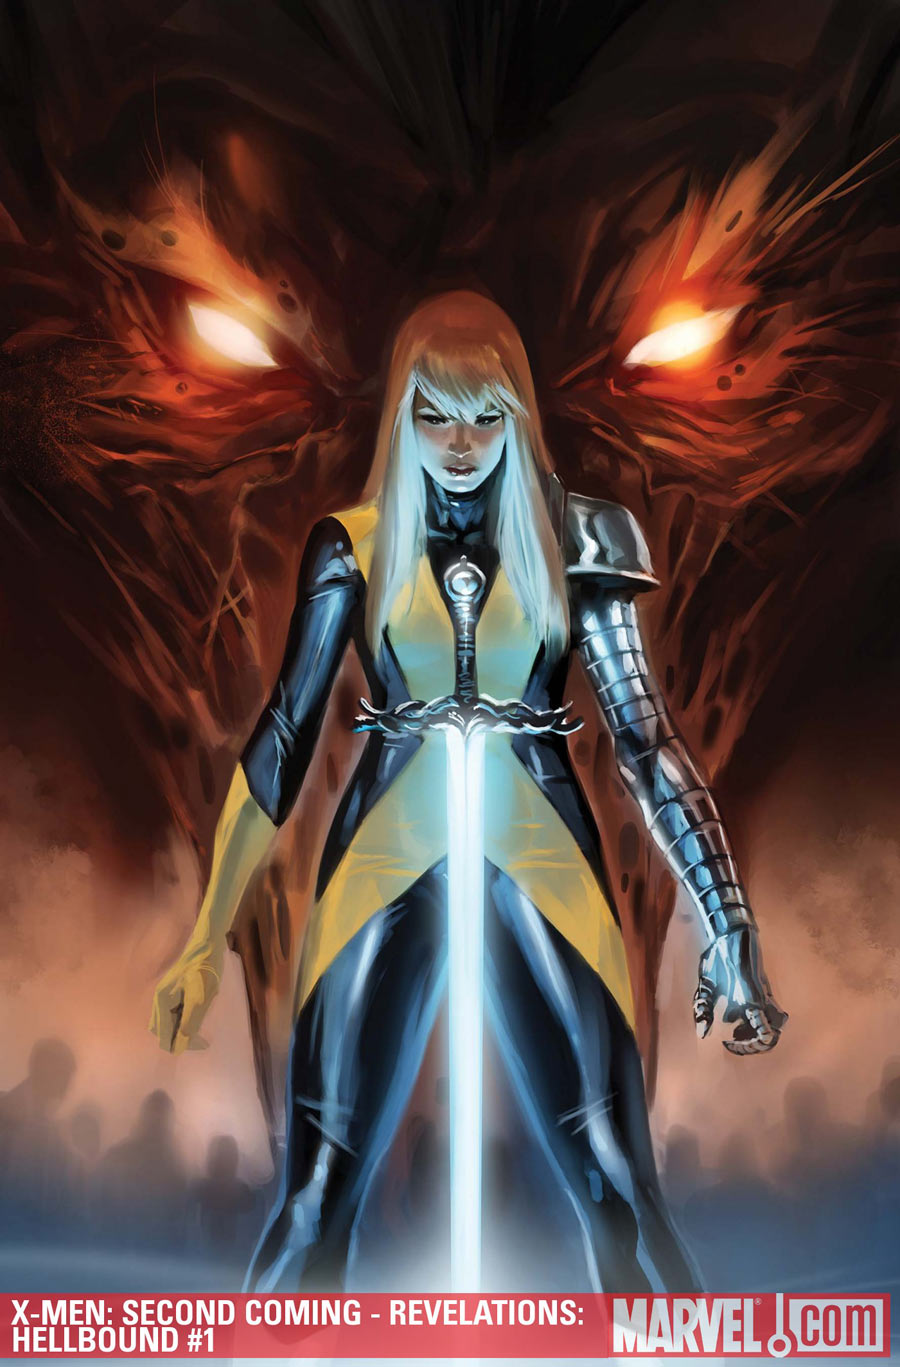 X-Men: Second Coming - Revelations: Hellbound #1